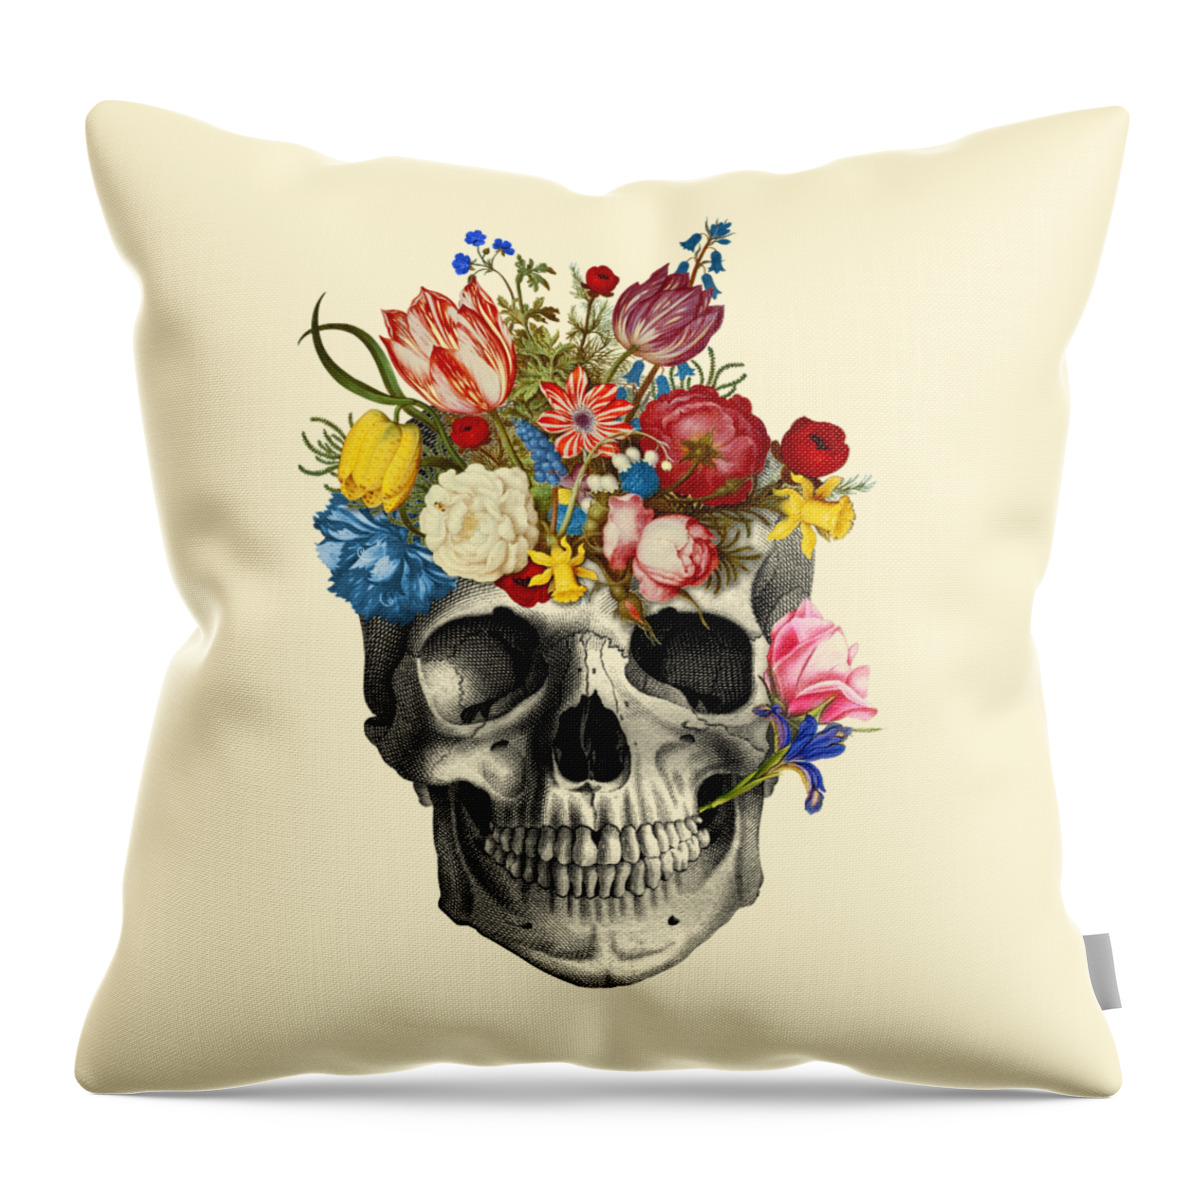 Skull Throw Pillow featuring the digital art Skull with flowers by Madame Memento